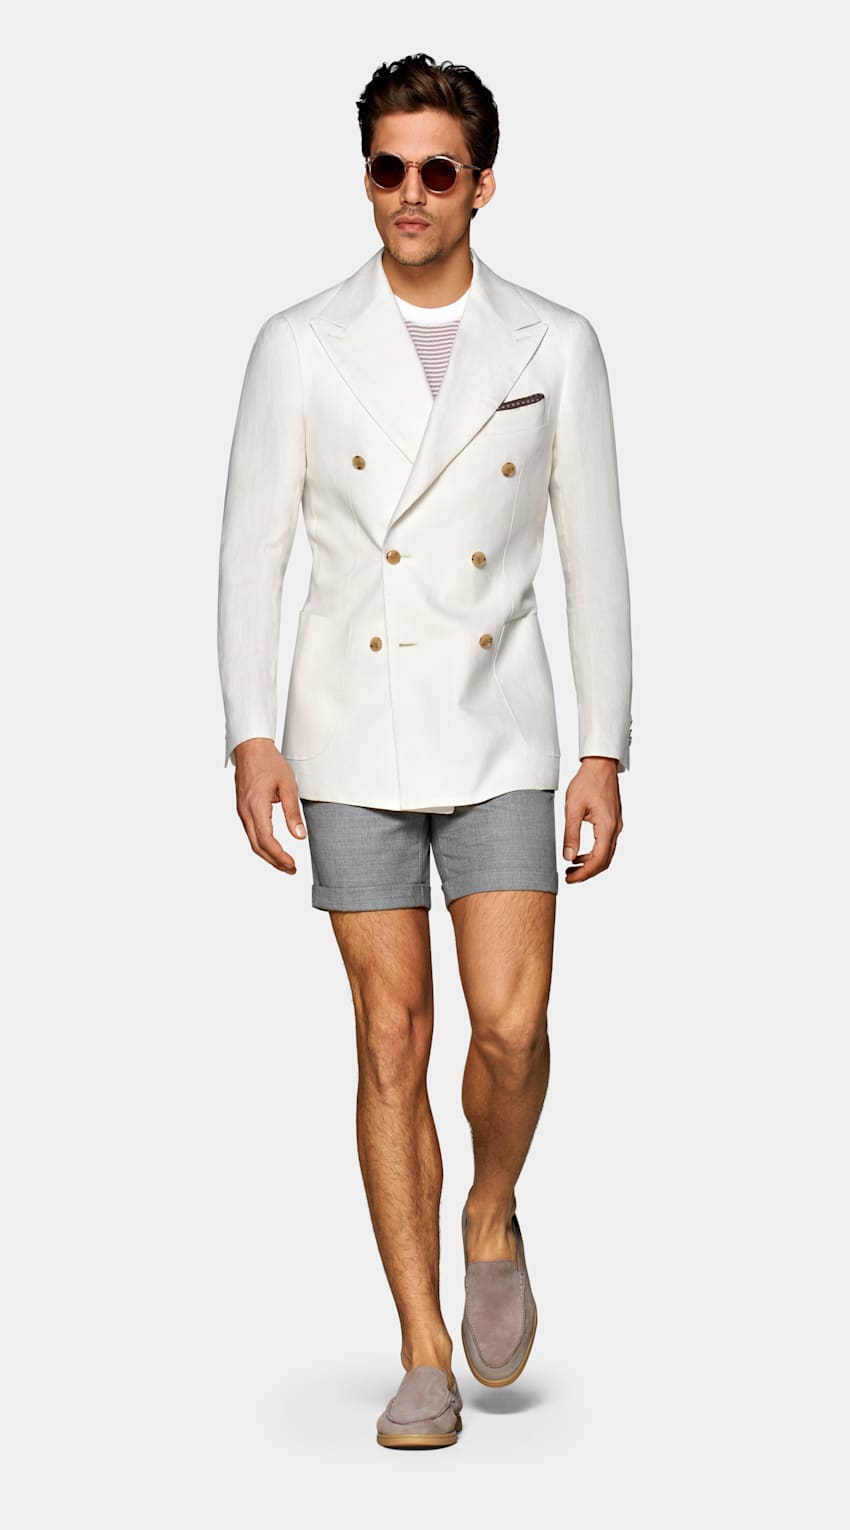 Off-White Havana Jacket | Pure Linen Double Breasted | Suitsupply ...